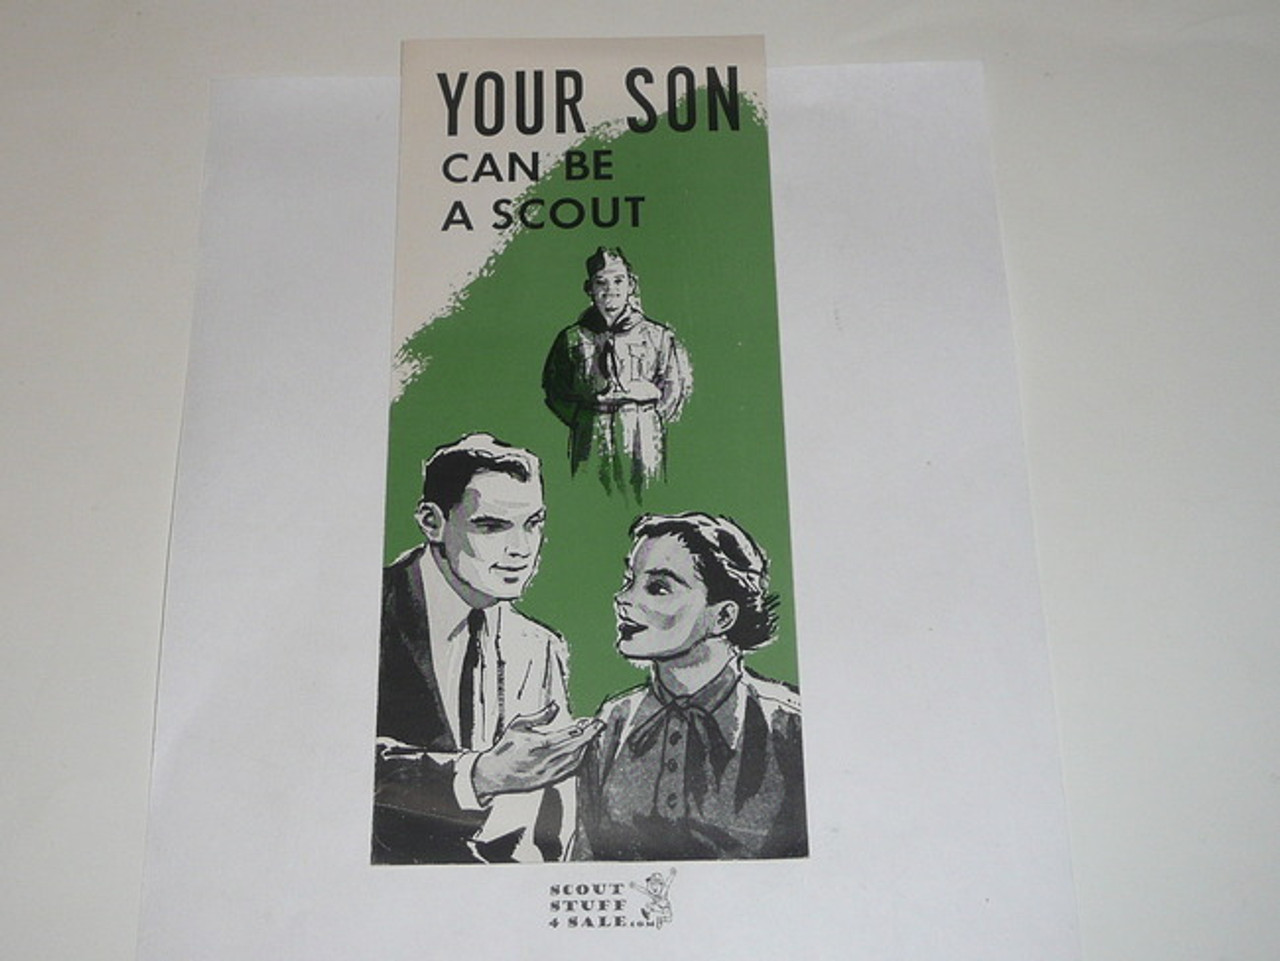 1963 Your Son Can be a Scout, Boy Scout Promotional Brochure, 2-63 printing